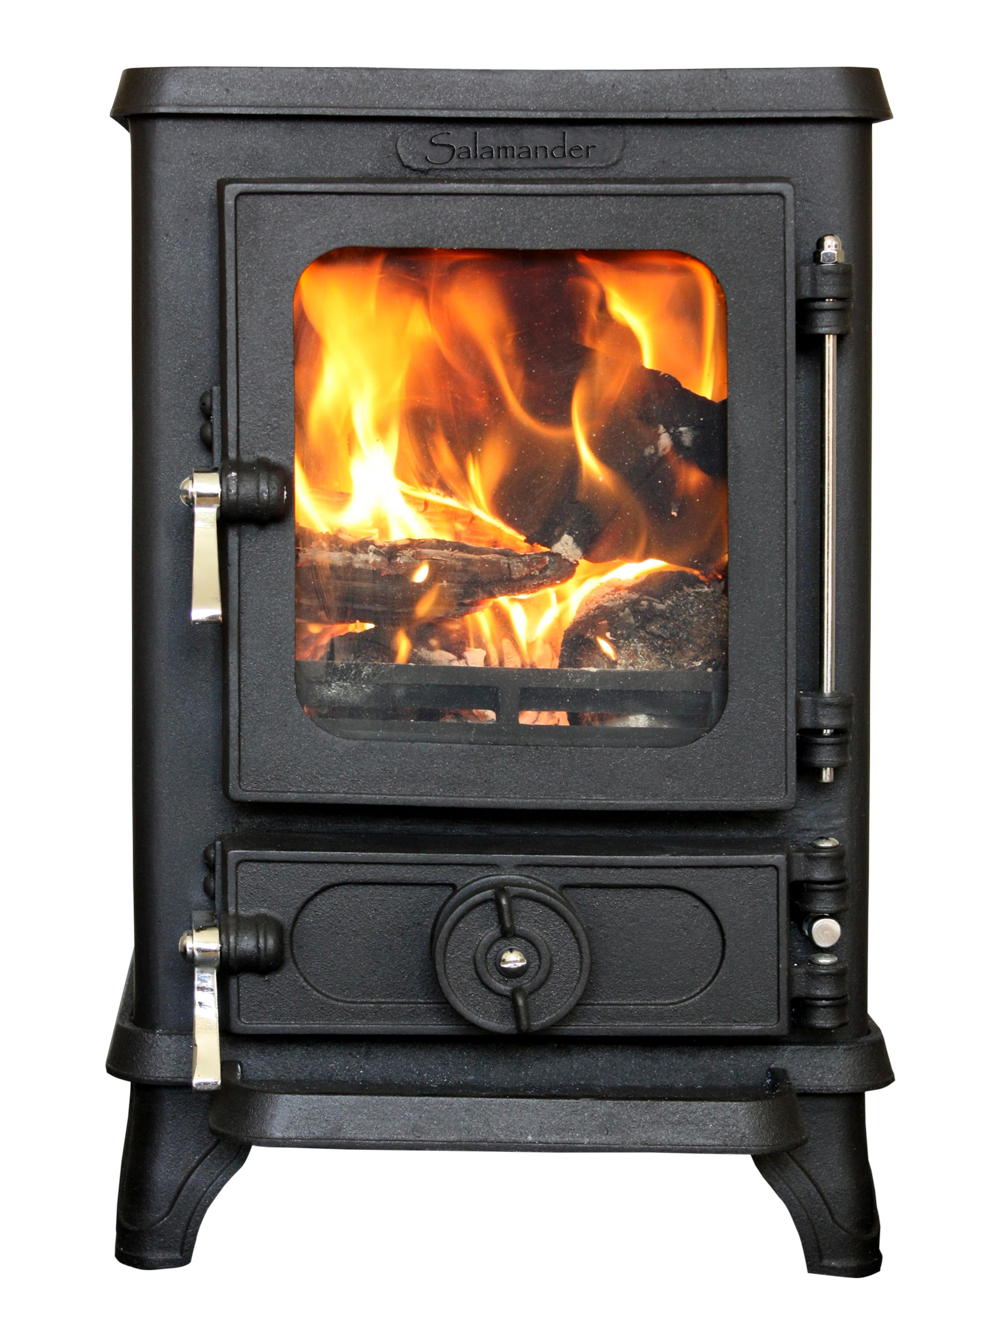 The Tiny Woodstove for small spaces - the Salamander Stove